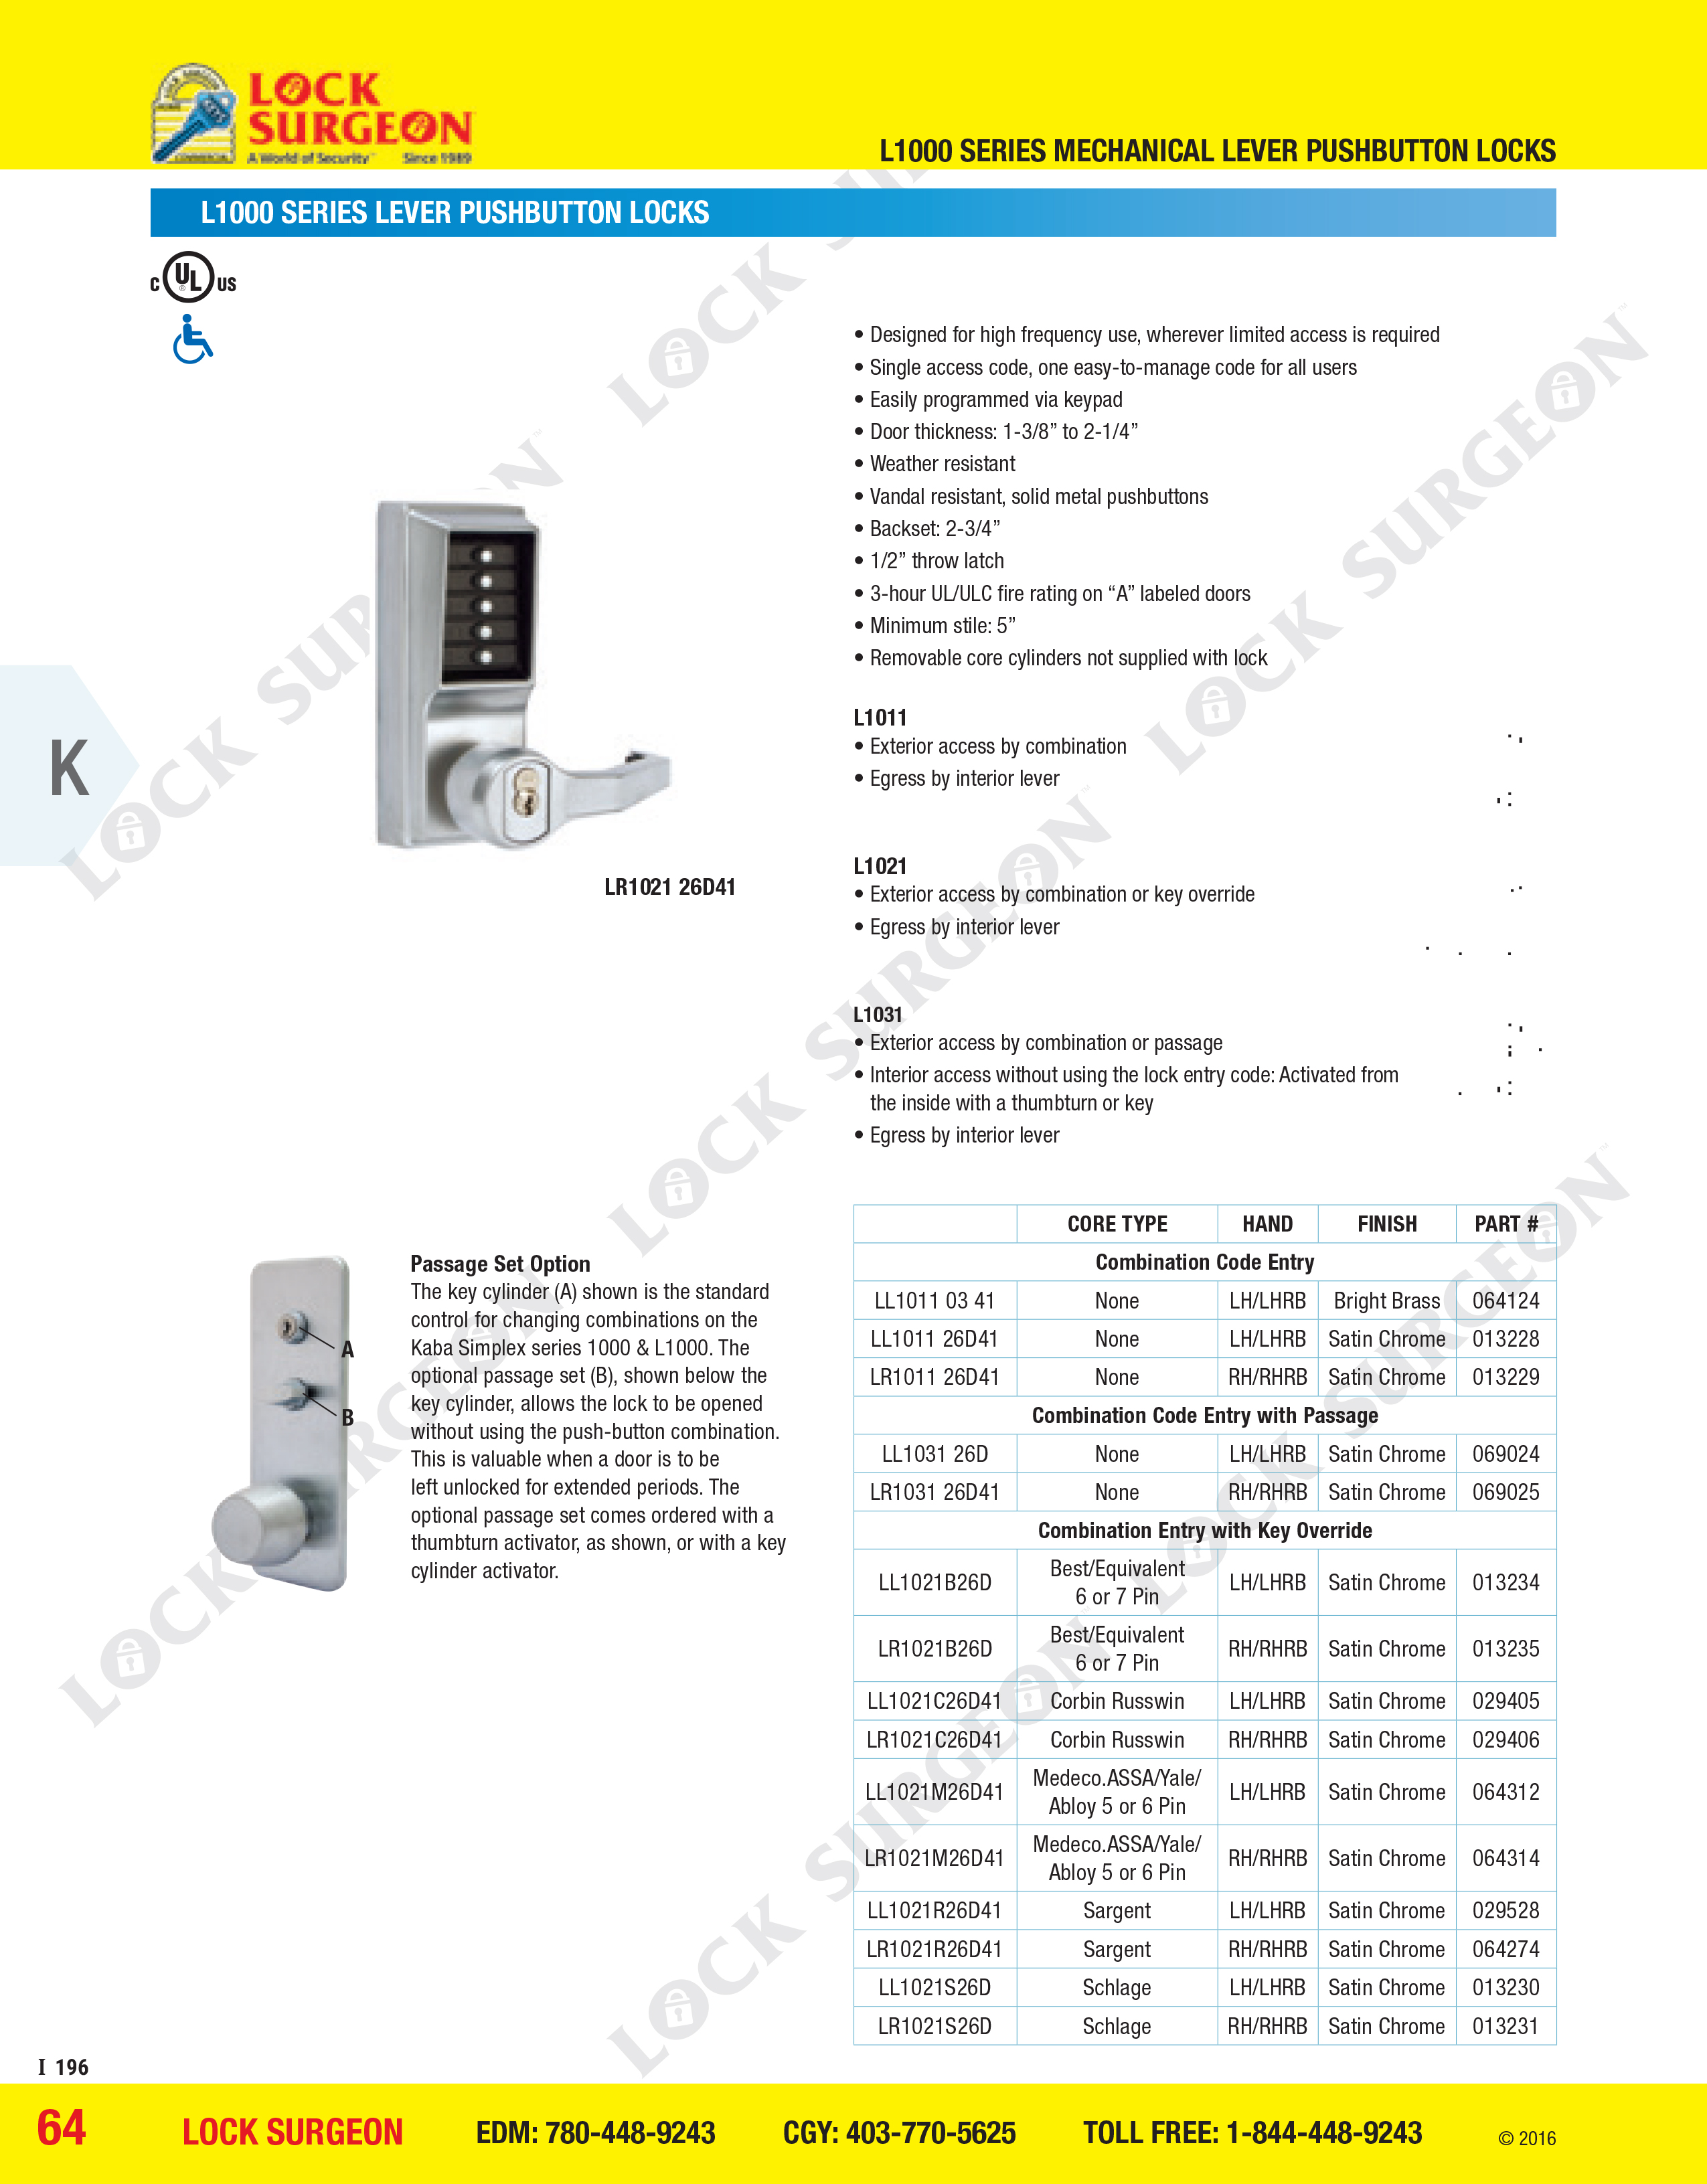 Chestermere Kaba-unican L-1000 series lever push-button locks.